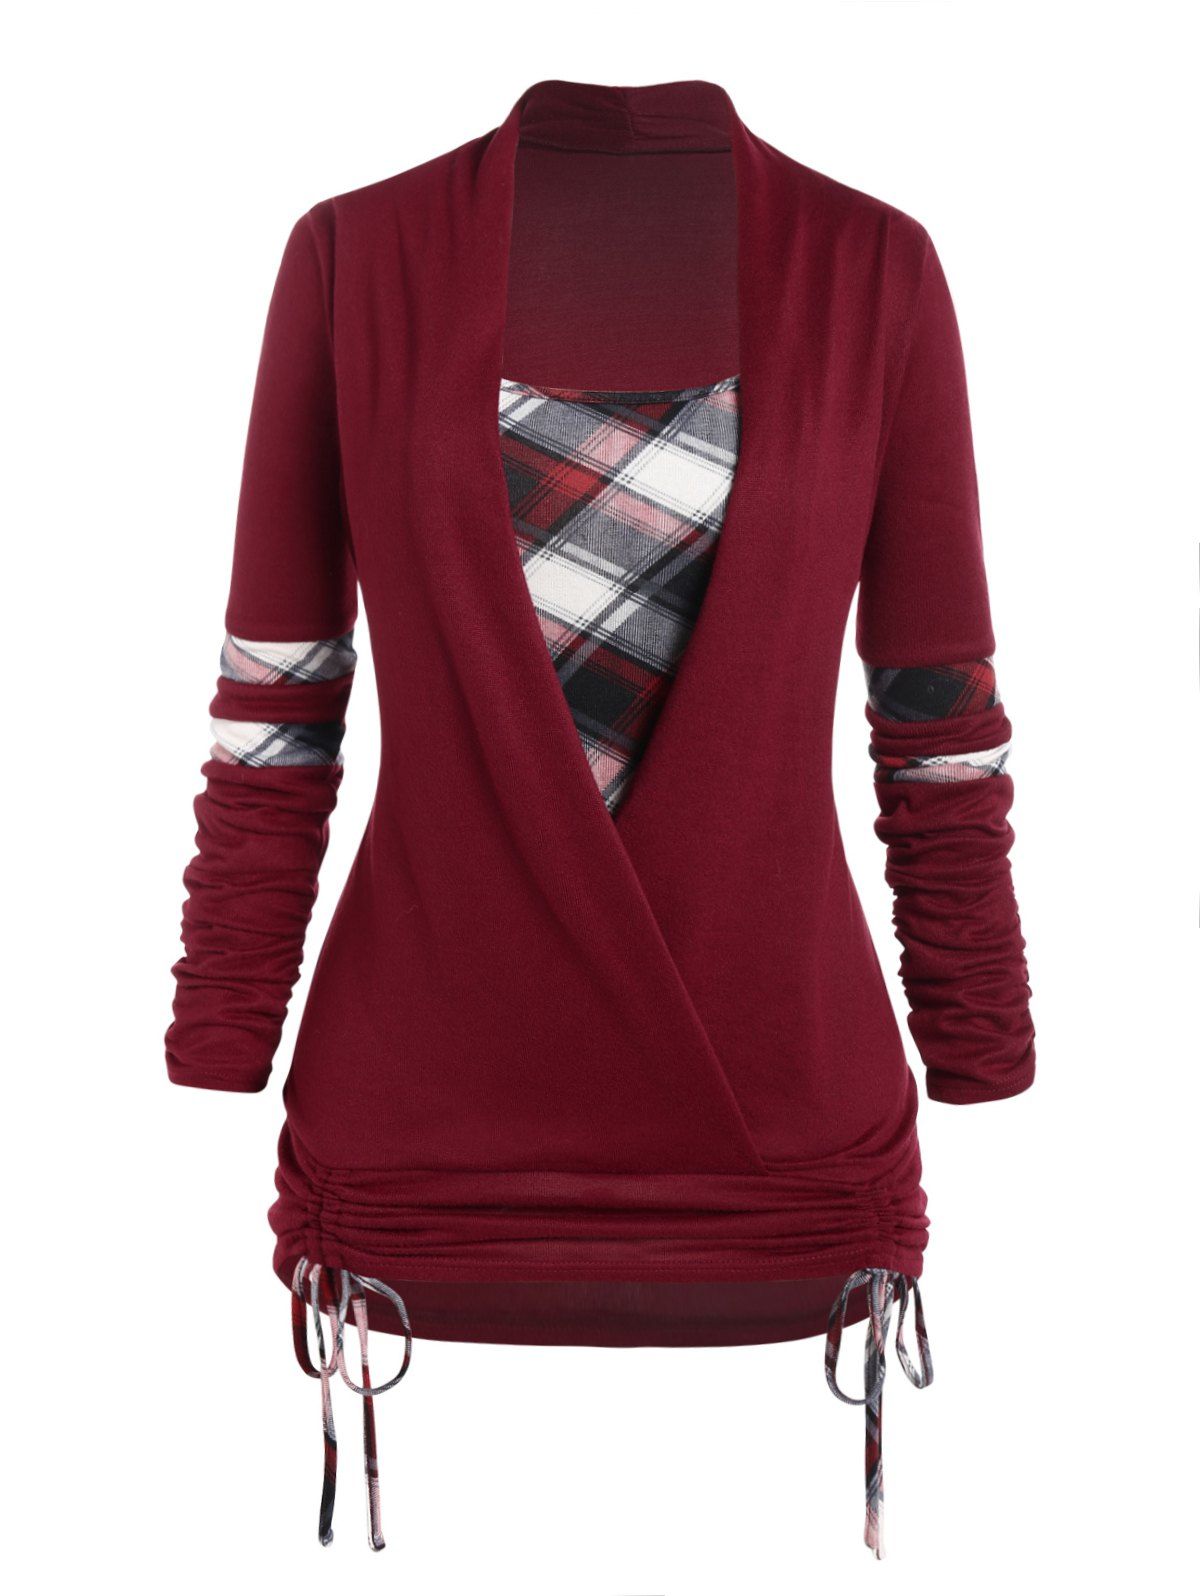 Fashion Women Plus Size Plaid Print Faux Twinset Knitwear Crossover Cinched Tie Full Sleeve Long Knit Top Clothing 5x Deep red